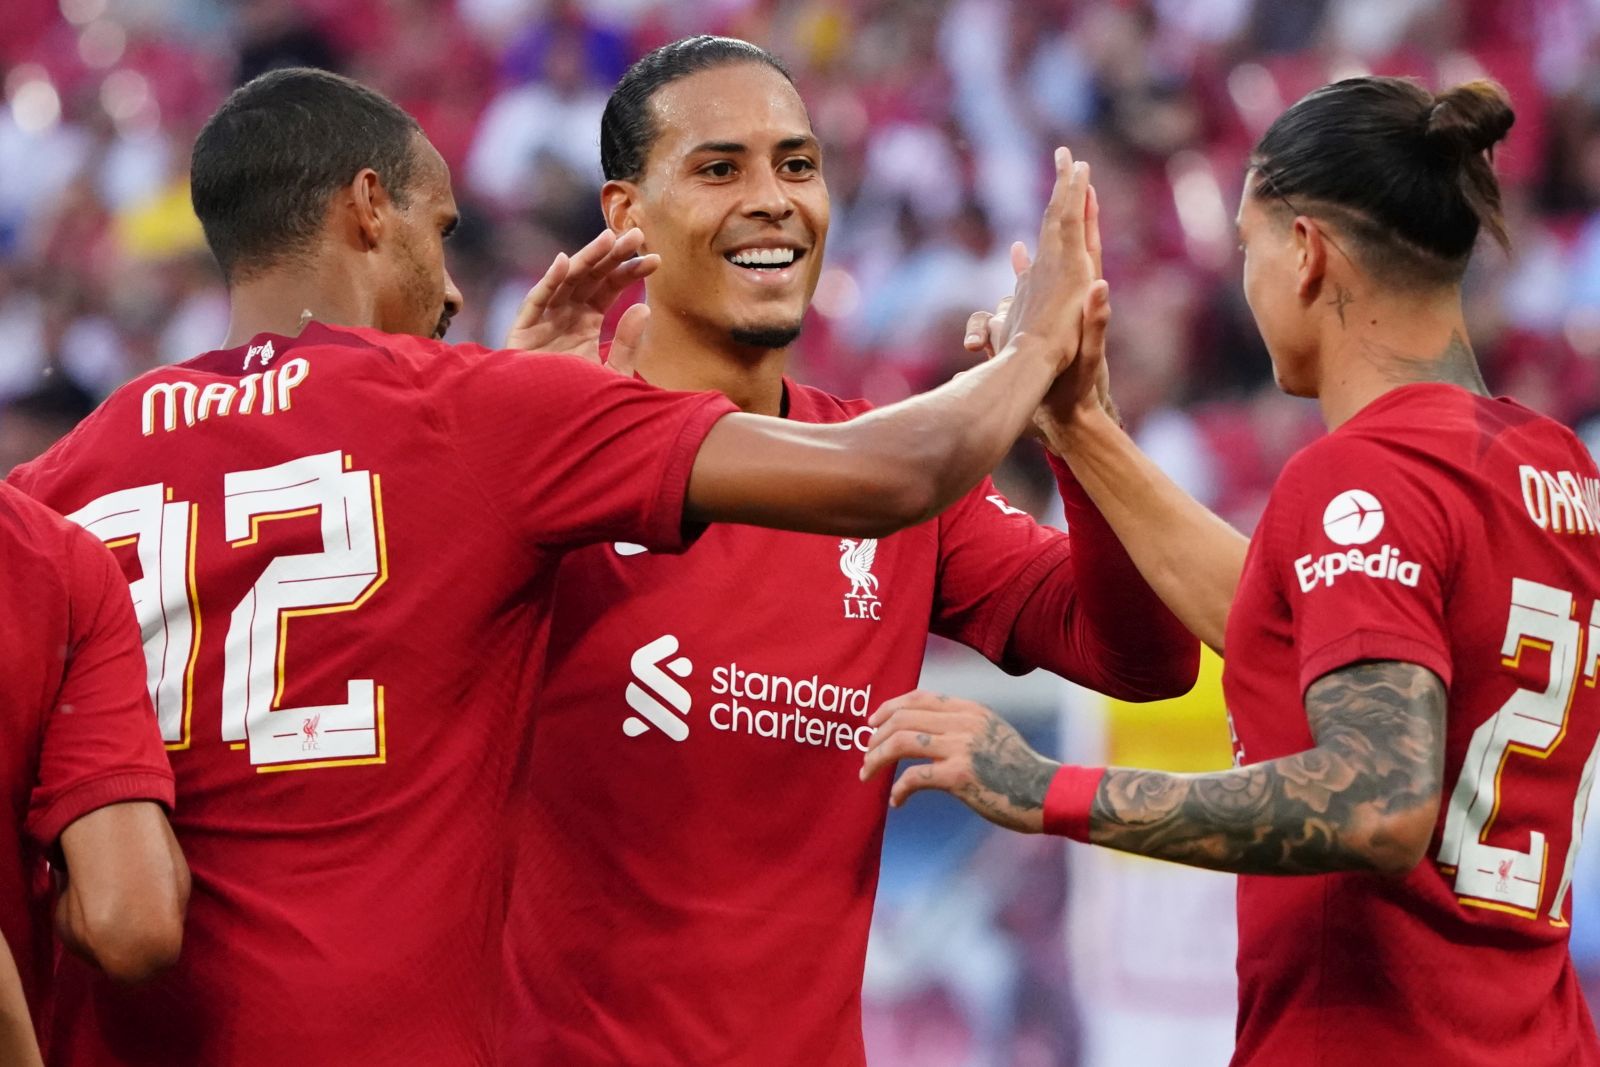 epa10084888 Liverpool’s players celebrate after scoring the 0-2 goal during the pre-season international friendly soccer match between RB Leipzig and Liverpool FC in Leipzig, Germany, 21 July 2022.  EPA/CLEMENS BILAN